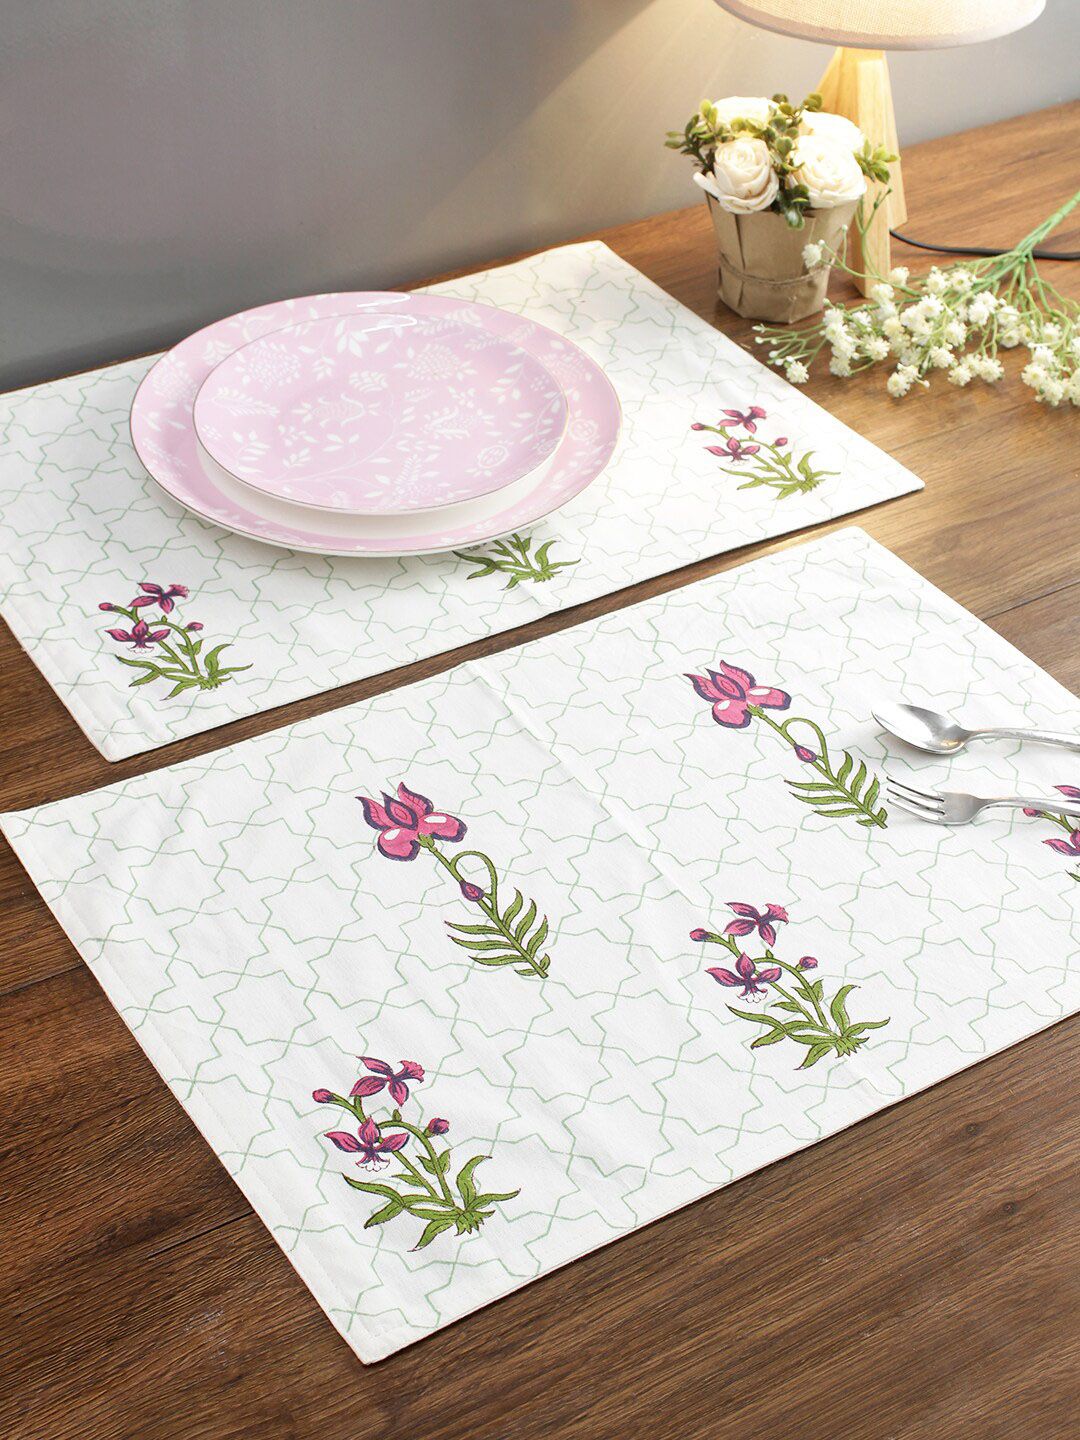 Rajasthan Decor Set Of 6 White & Pink Floral Printed Sustainable Table Placemats Price in India